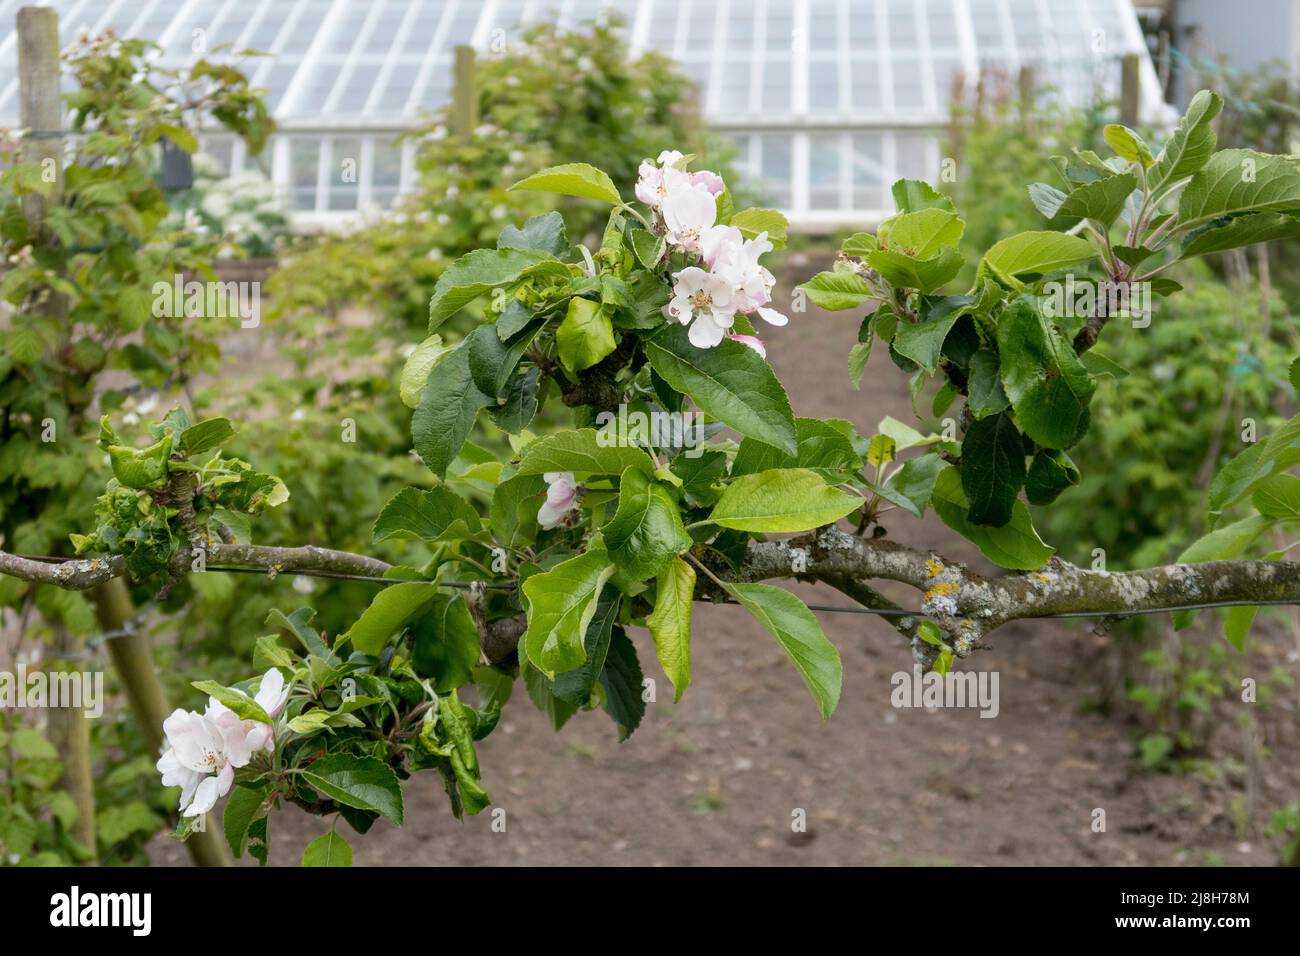 Apple blossom flowering in old English walled garden Stock Photo